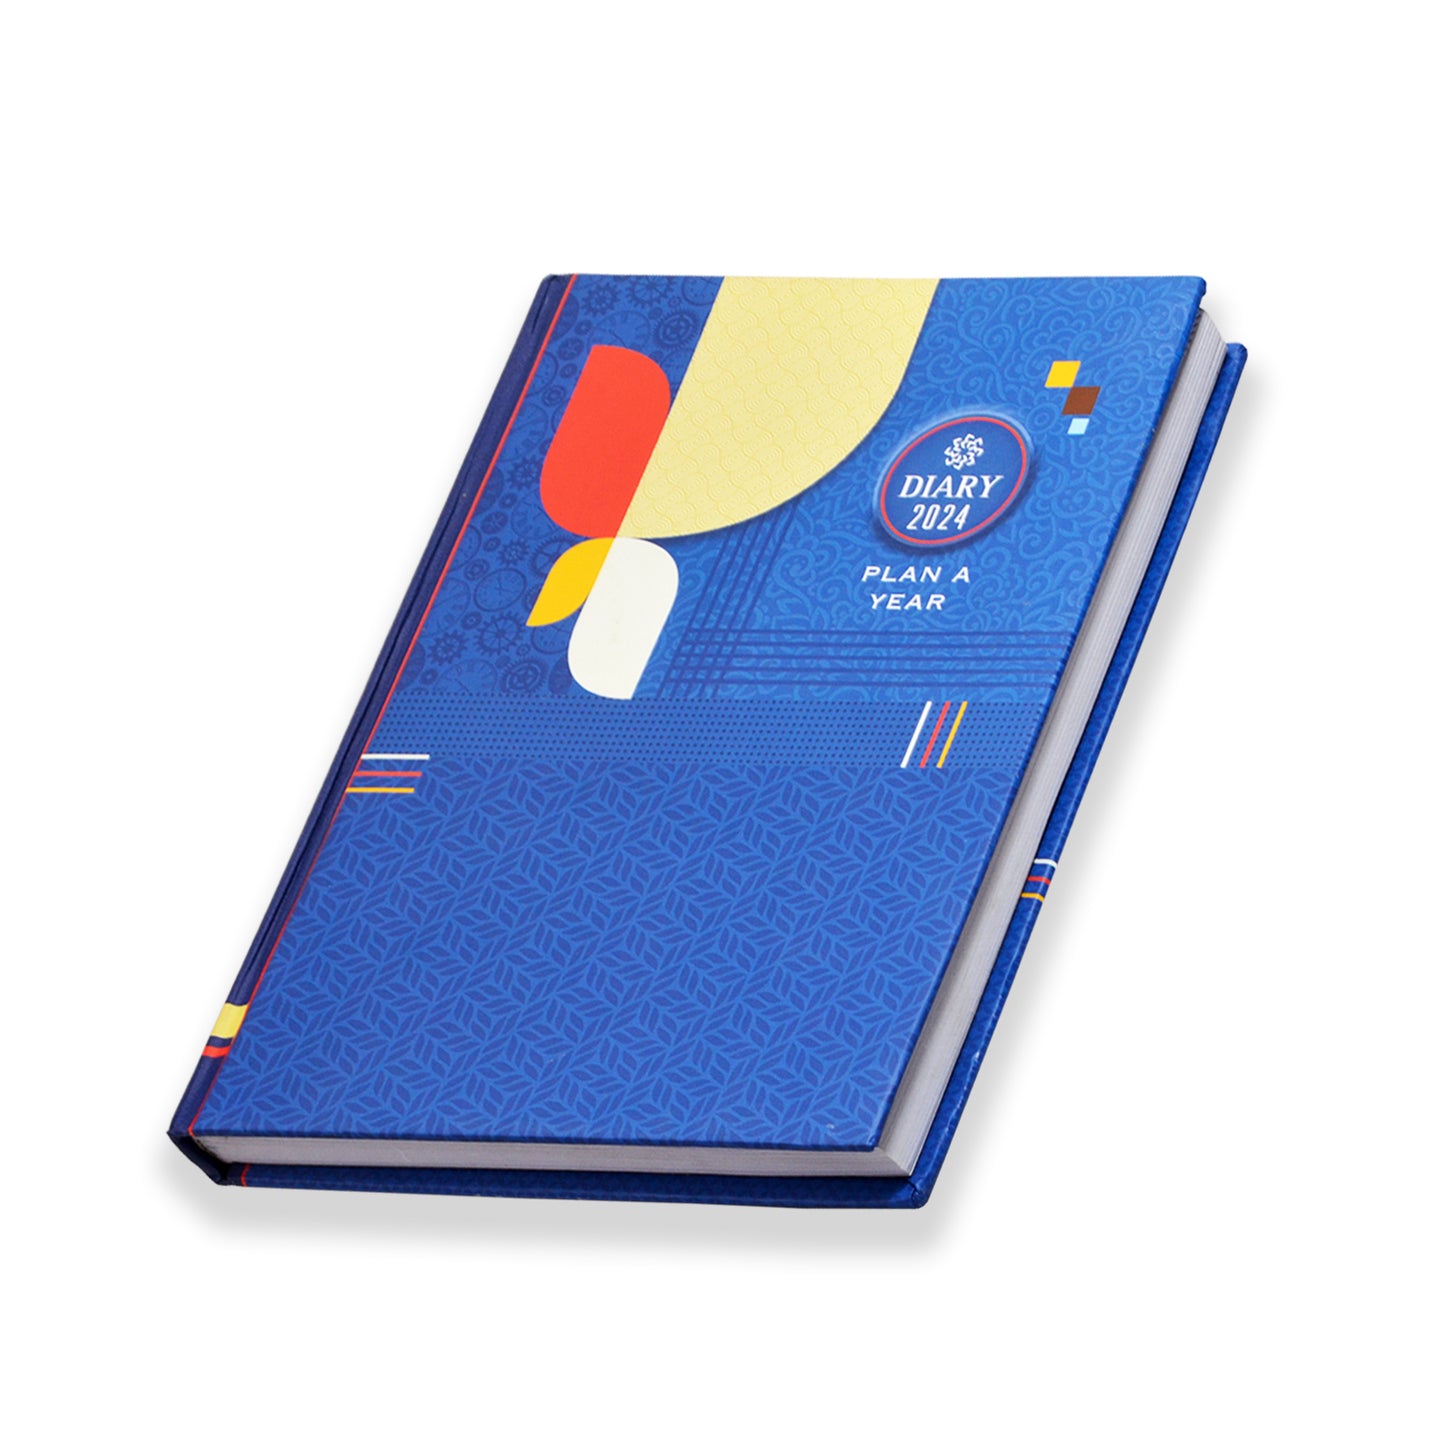 ALL IN ONE 2024 Diary | Planner | Organizer for Office Going Men & Women…